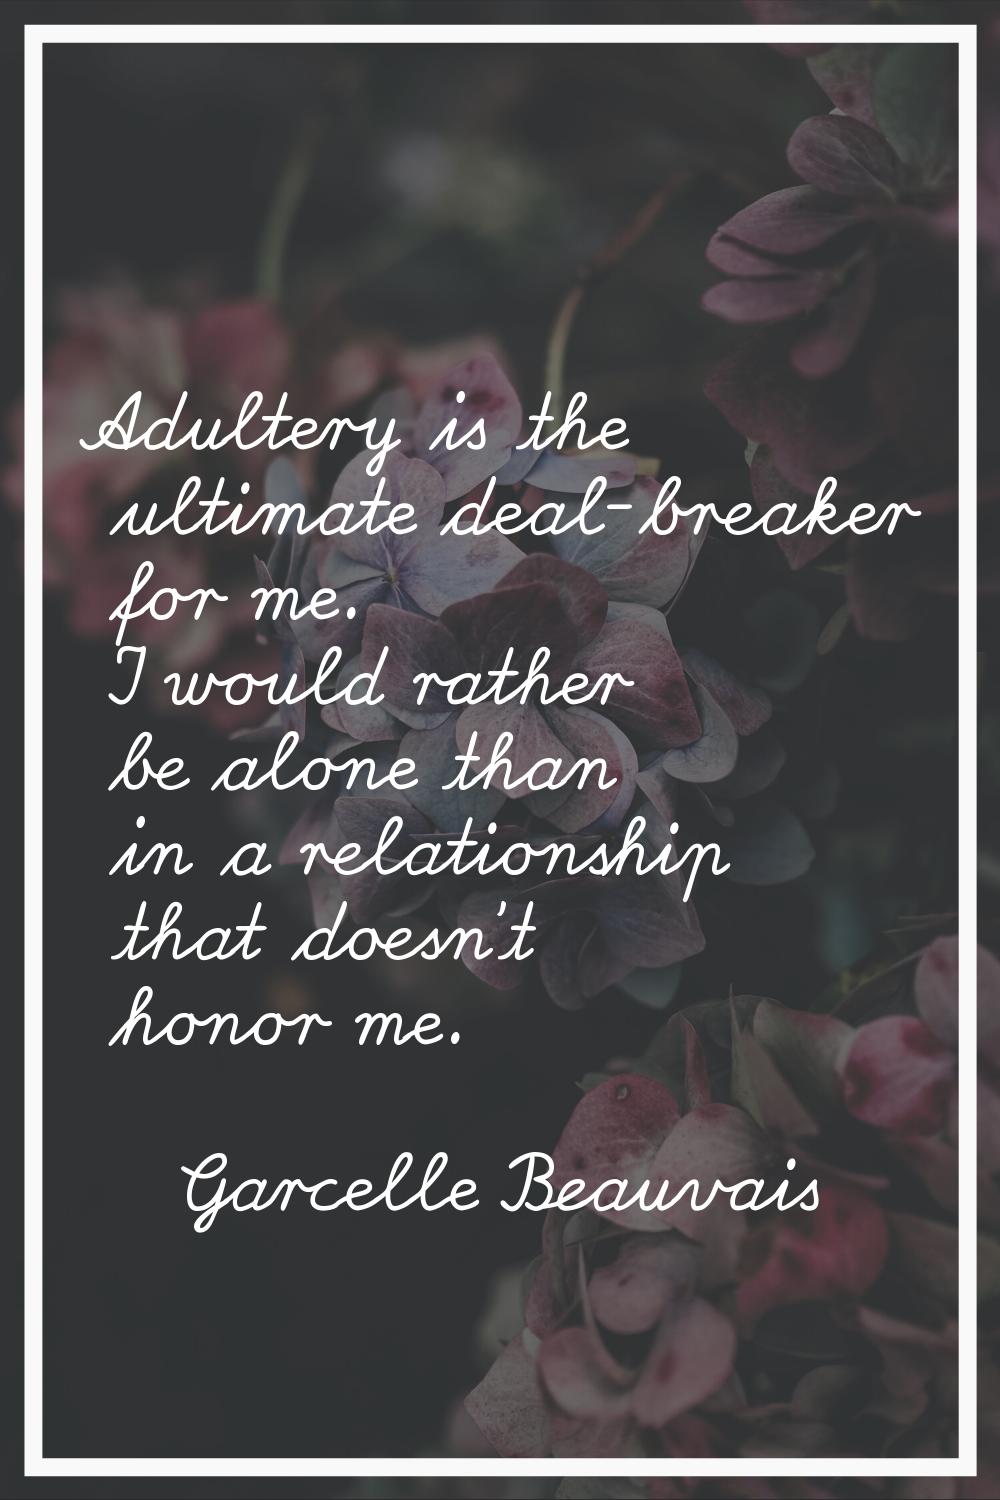 Adultery is the ultimate deal-breaker for me. I would rather be alone than in a relationship that d